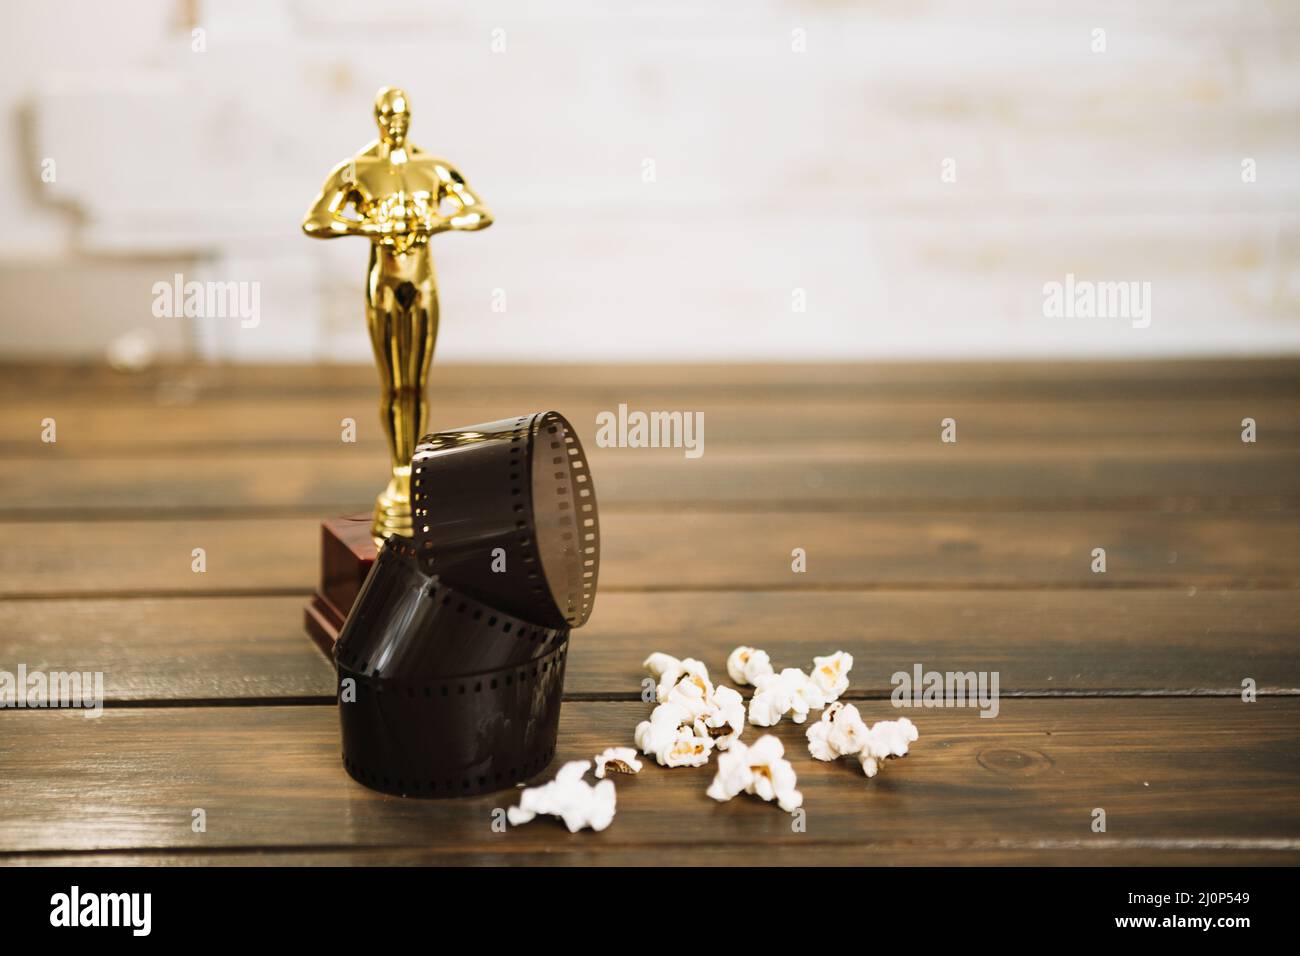 Oscar statuette film popcorn . High quality and resolution beautiful photo concept Stock Photo